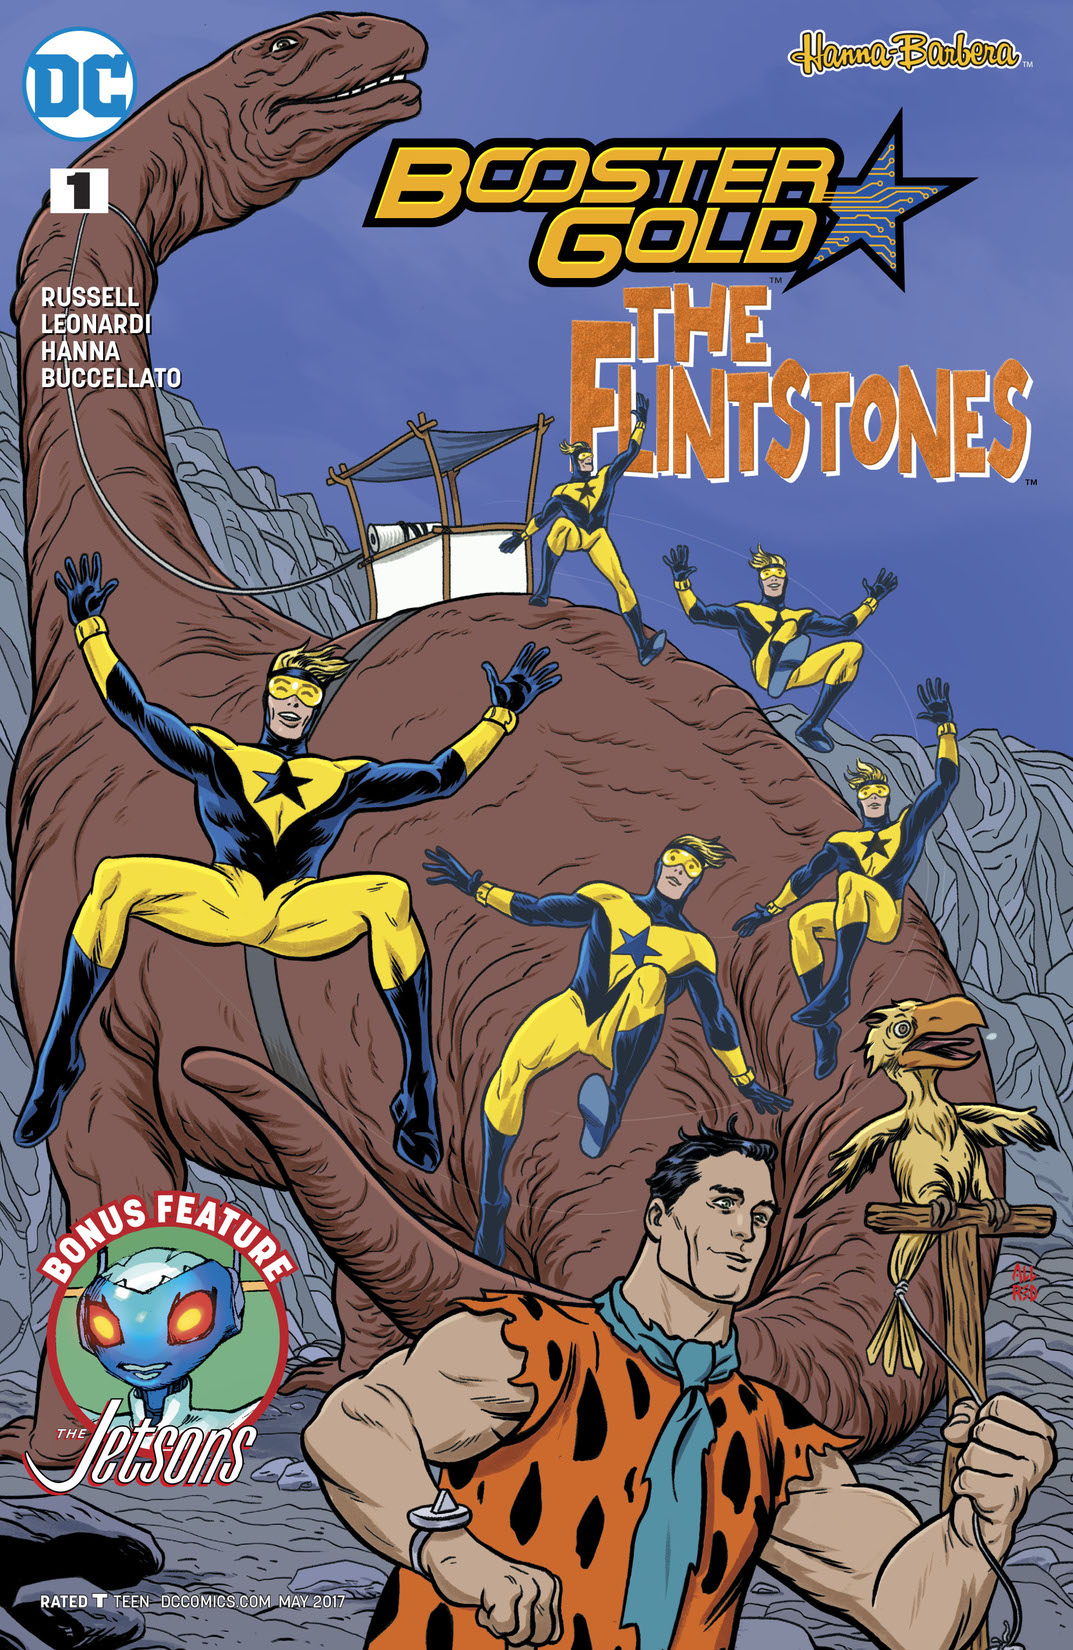 Booster Gold/The Flintstones Special #1 preview images